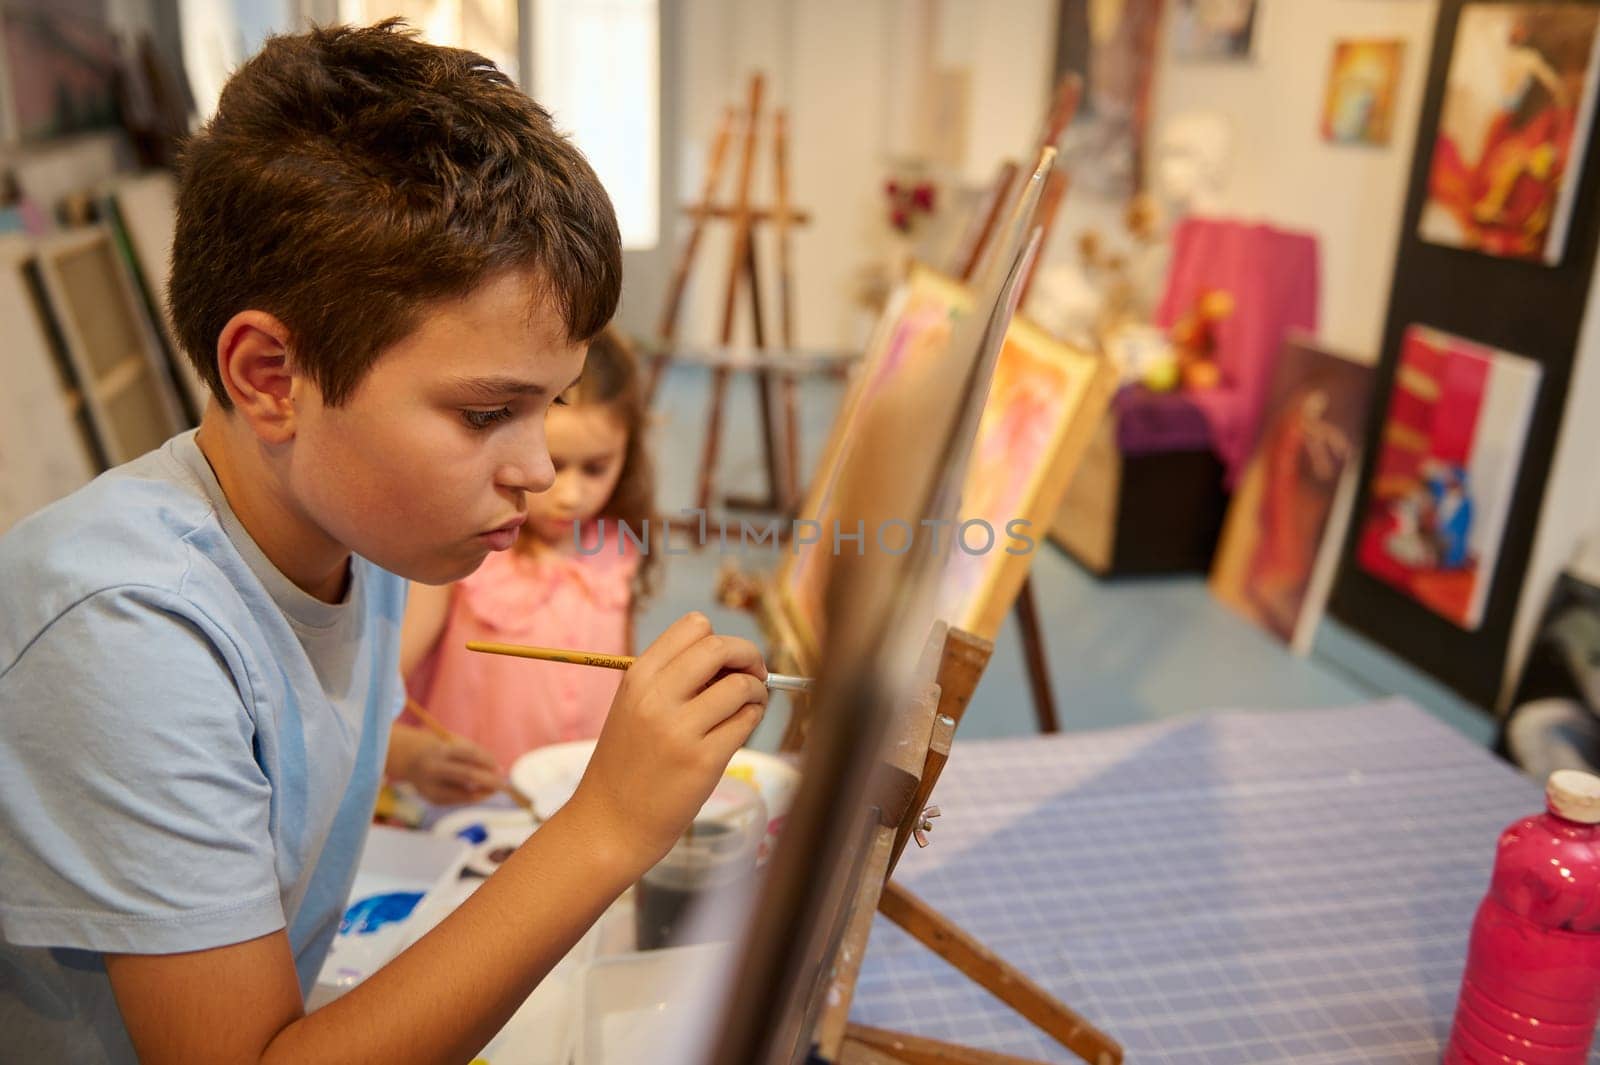 Caucasian handsome teenage school boy focused on painting on canvas in creative art workshop. Acrylic, oil or watercolor painting, drawing, people, kids, education concept